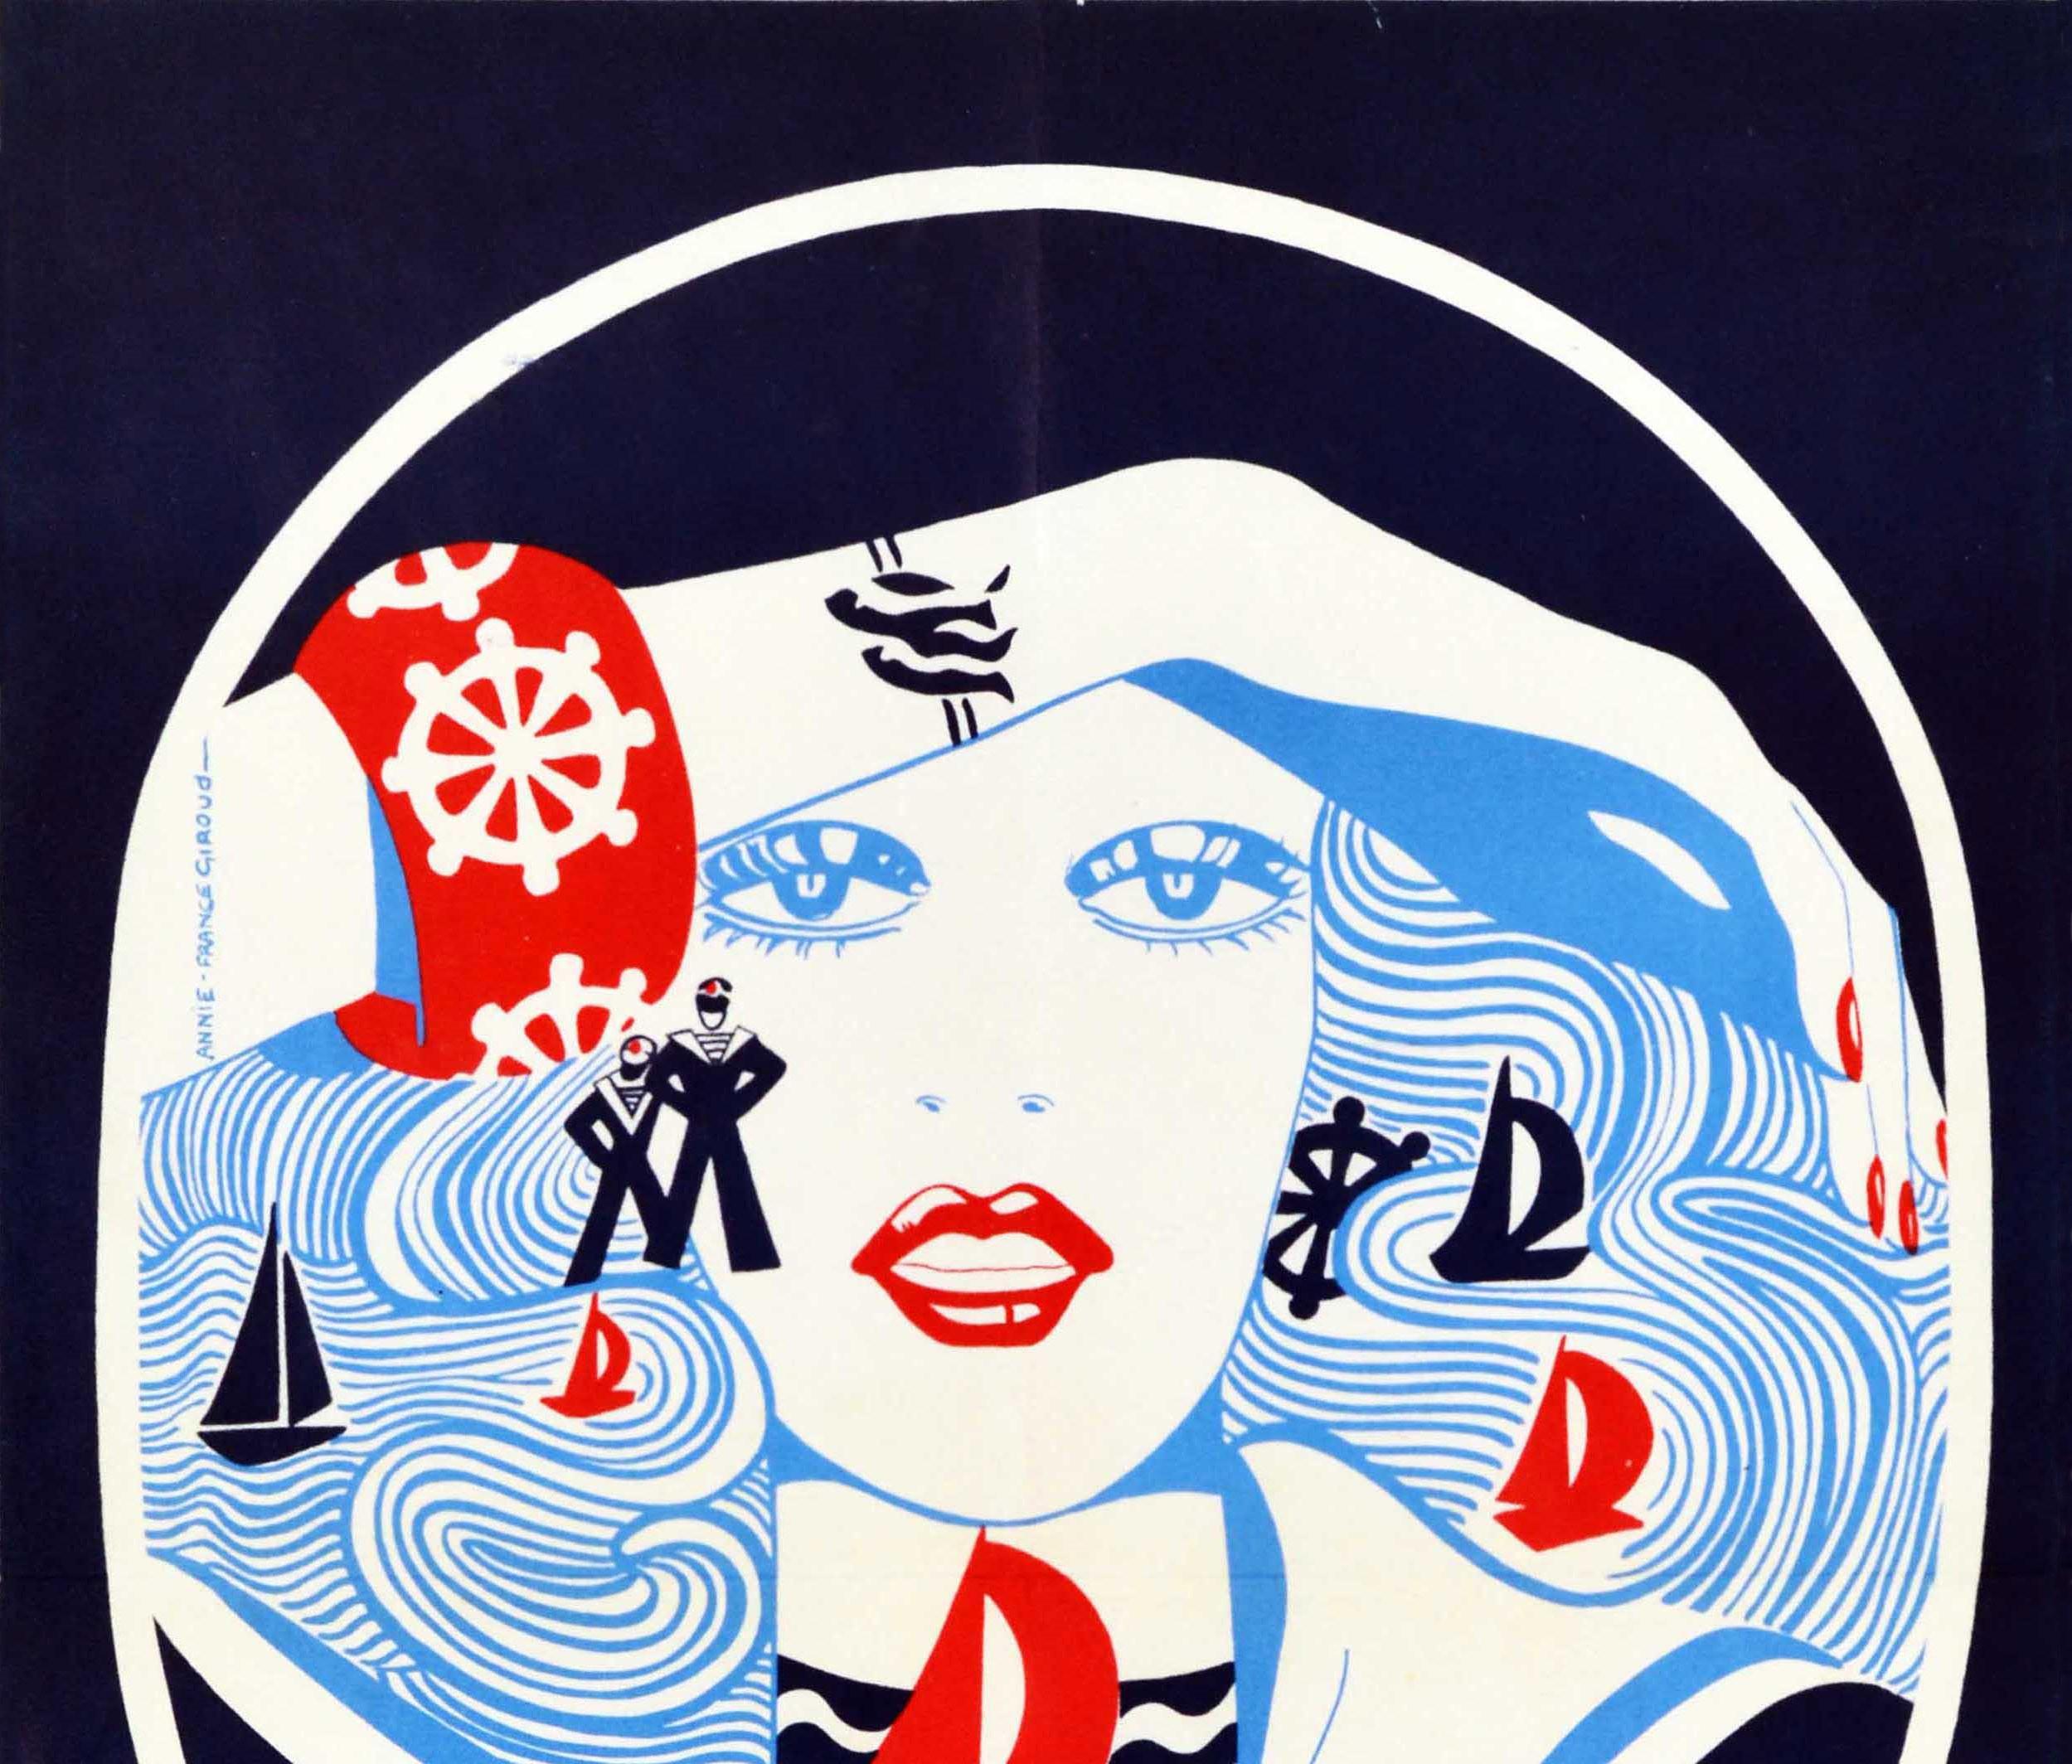 Original vintage fashion advertising poster for Bijou Fantaisie costume jewellery featuring an illustration in pale blue and white of a lady with long flowing hair and red lipstick wearing a sailor's top with a fish style bracelet and a thick red